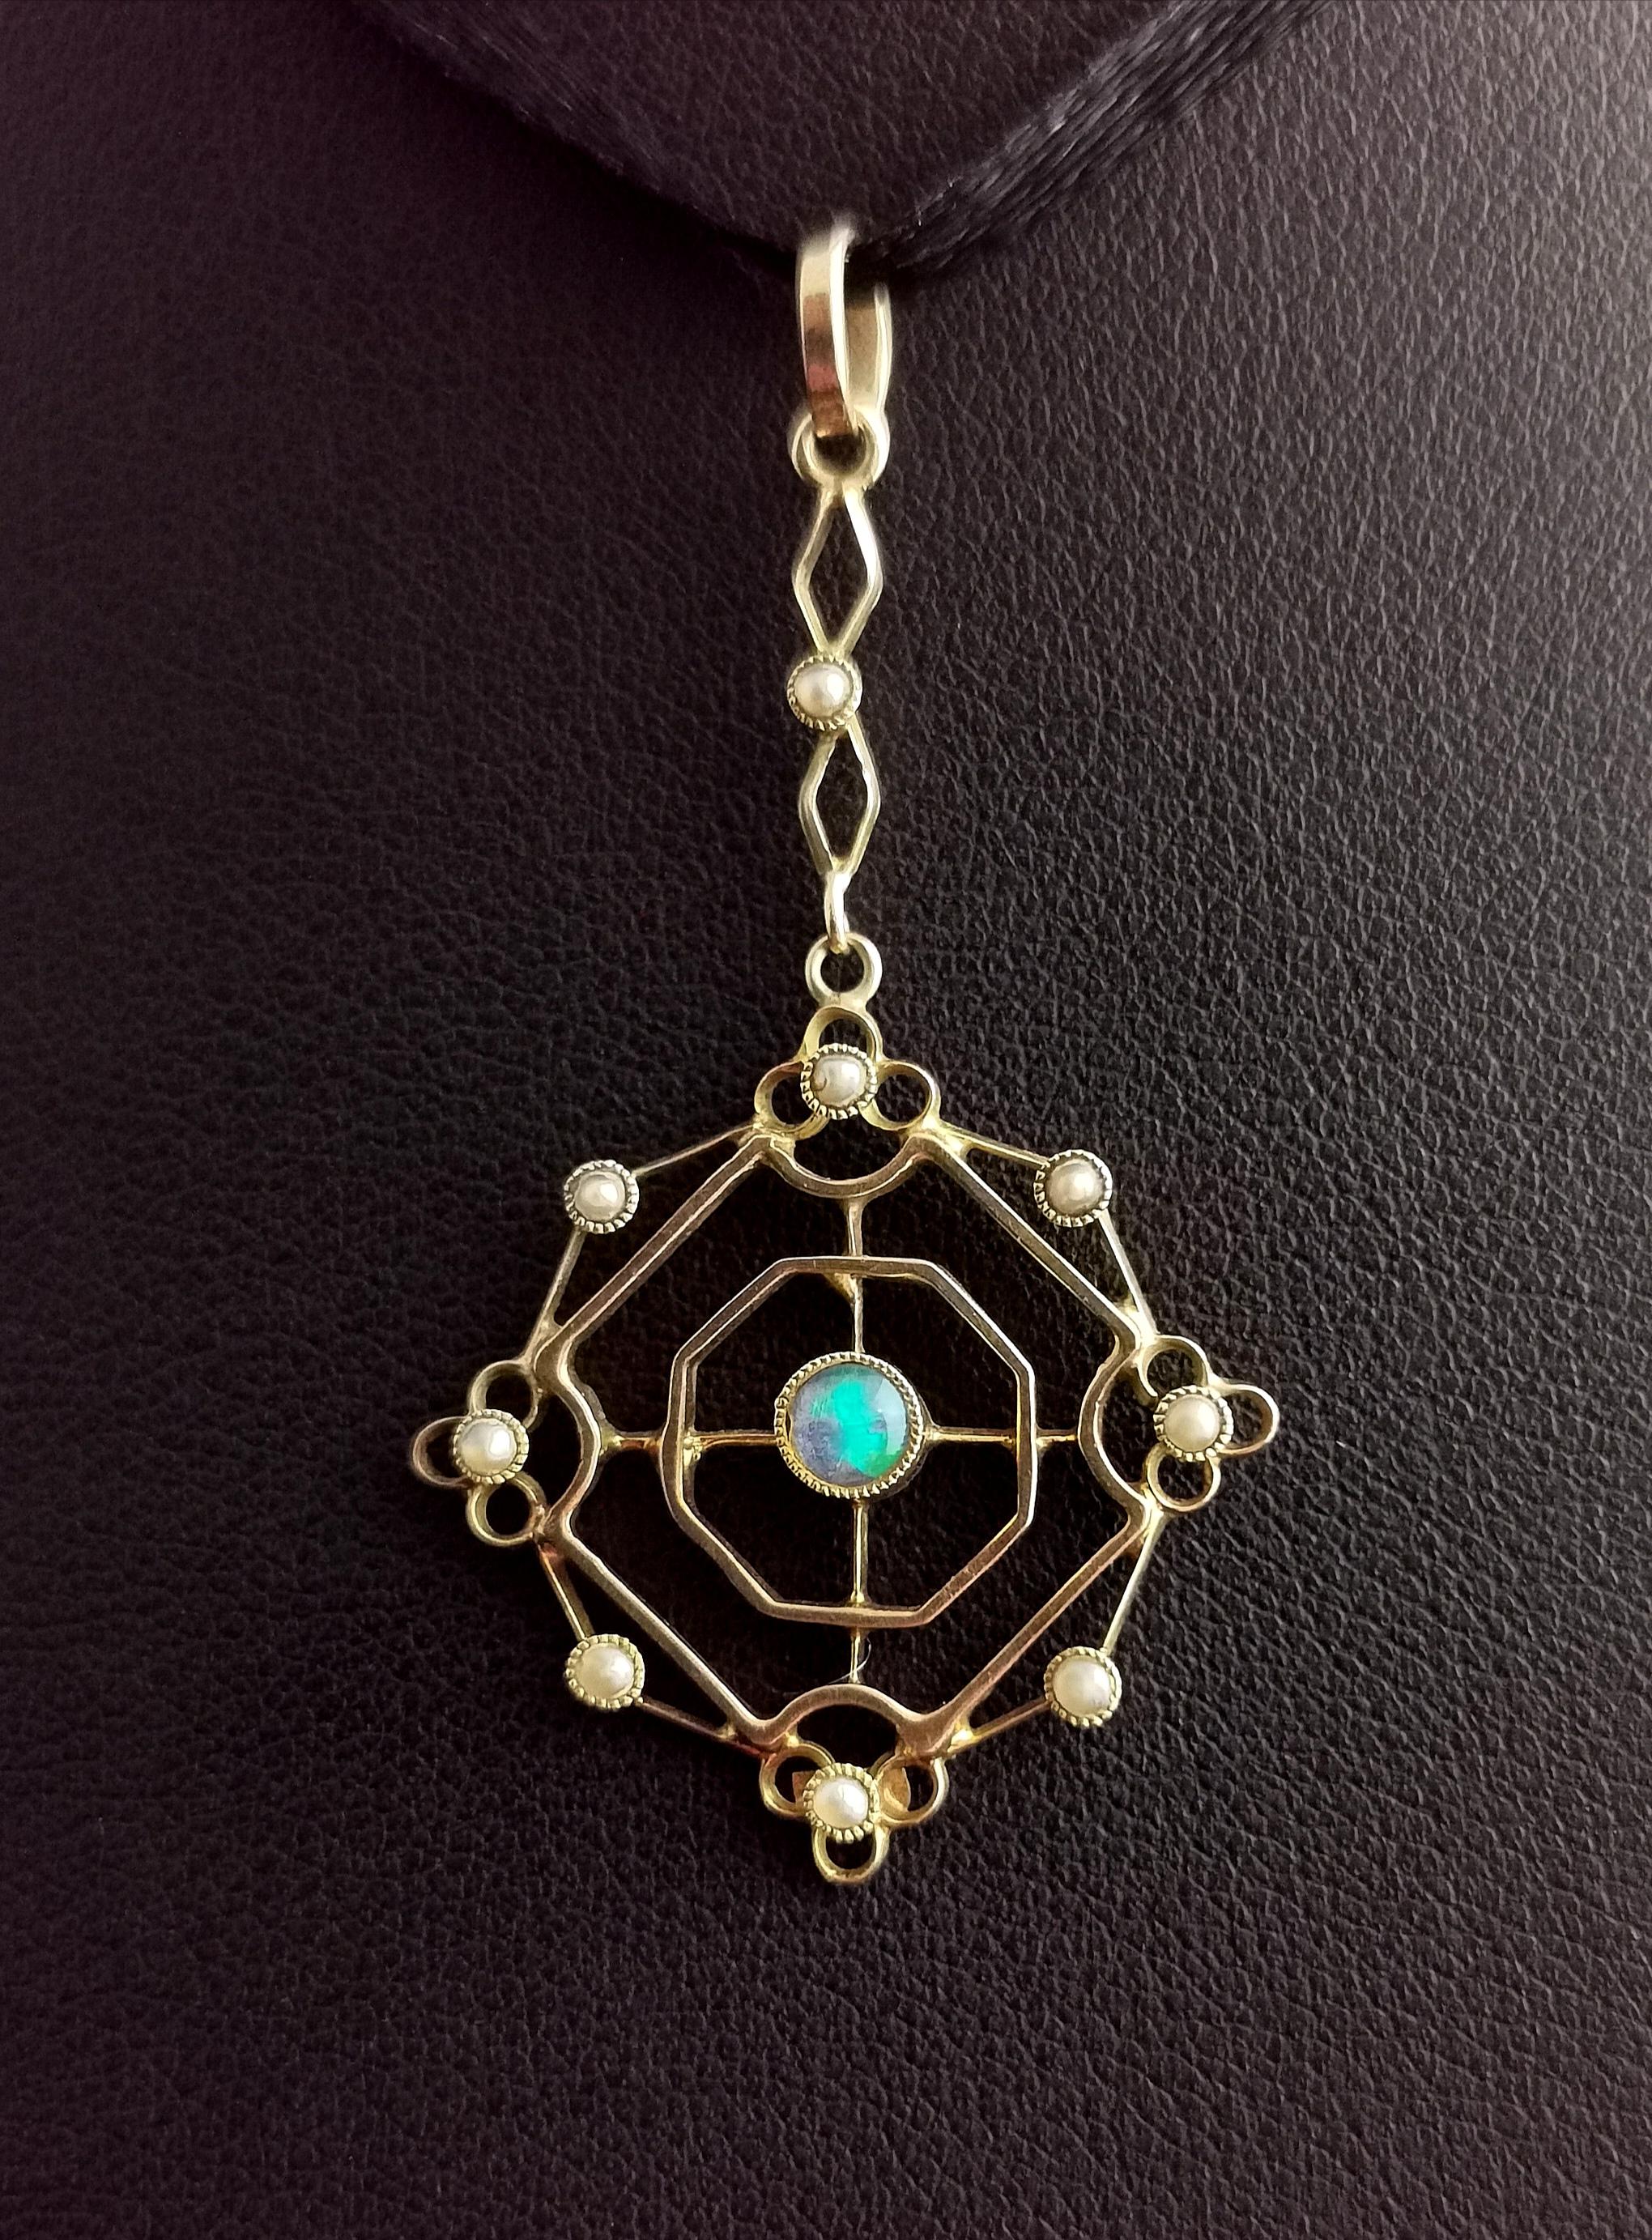 A pretty and delicate antique, Art Nouveau Opal and seed pearl pendant.

It is a pretty geometric shaped pendant with an openwork design and a decorative integral drop bale, the outer edge of the pendant is set with tiny creamy seed pearls as is the